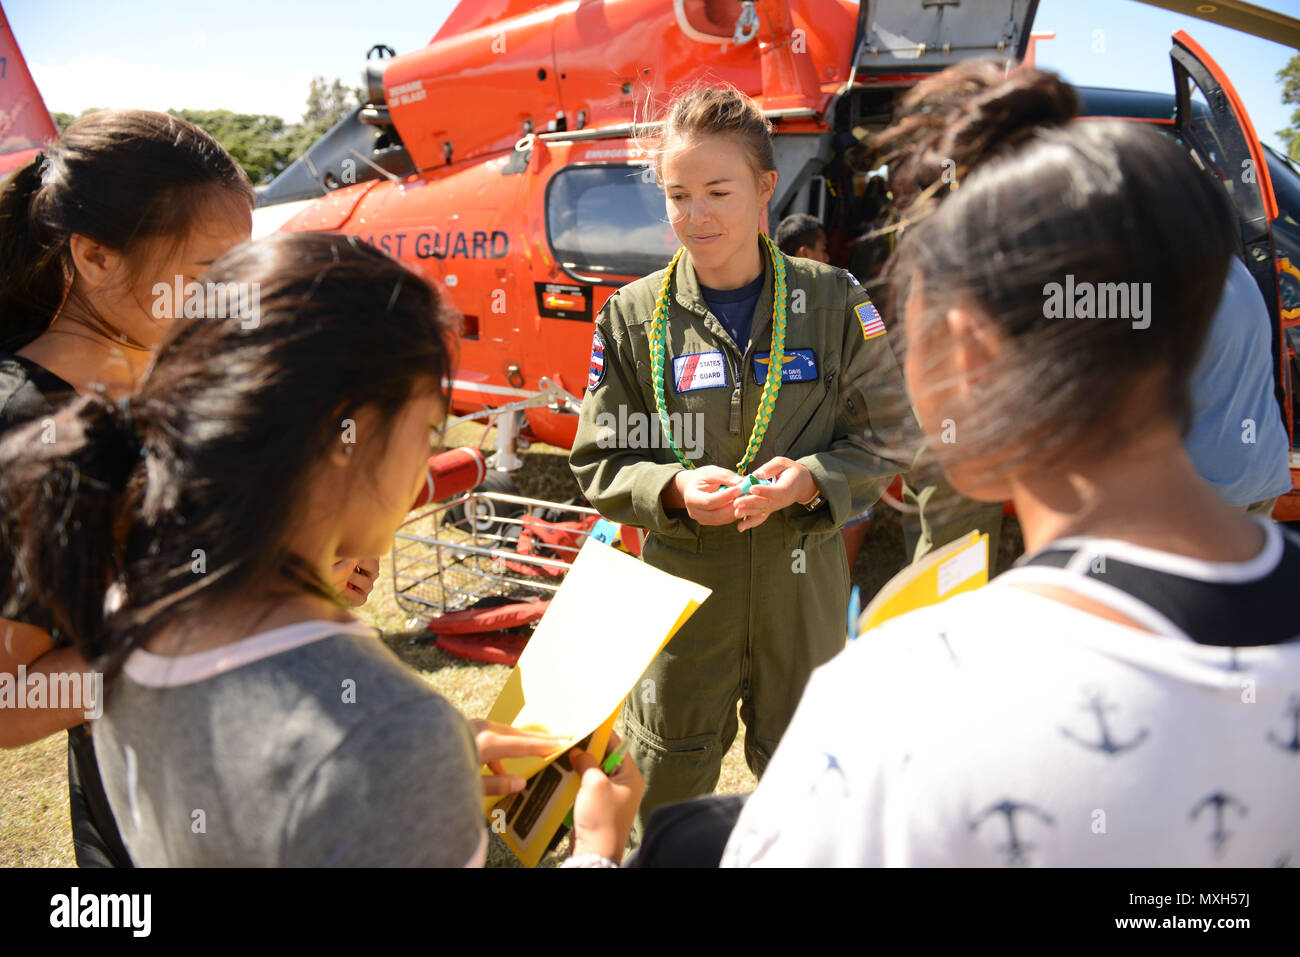 Lt. Lisa Davis, an MH-65 Dolphin helicopter pilot at Coast Guard Air Station Barbers Point, Oahu, speaks with several teens during a career day at Lanai High and Elementary School in Lanai, Nov. 2, 2016. Several crewmembers from Air Station Barbers Point flew from Oahu to speak with the children about possible career opportunities in the Coast Guard and aviation as well as providing an up close look at an MH-65 Dolphin helicopter. (U.S. Coast Guard photo by Petty Officer 2nd Class Tara Molle) Stock Photo